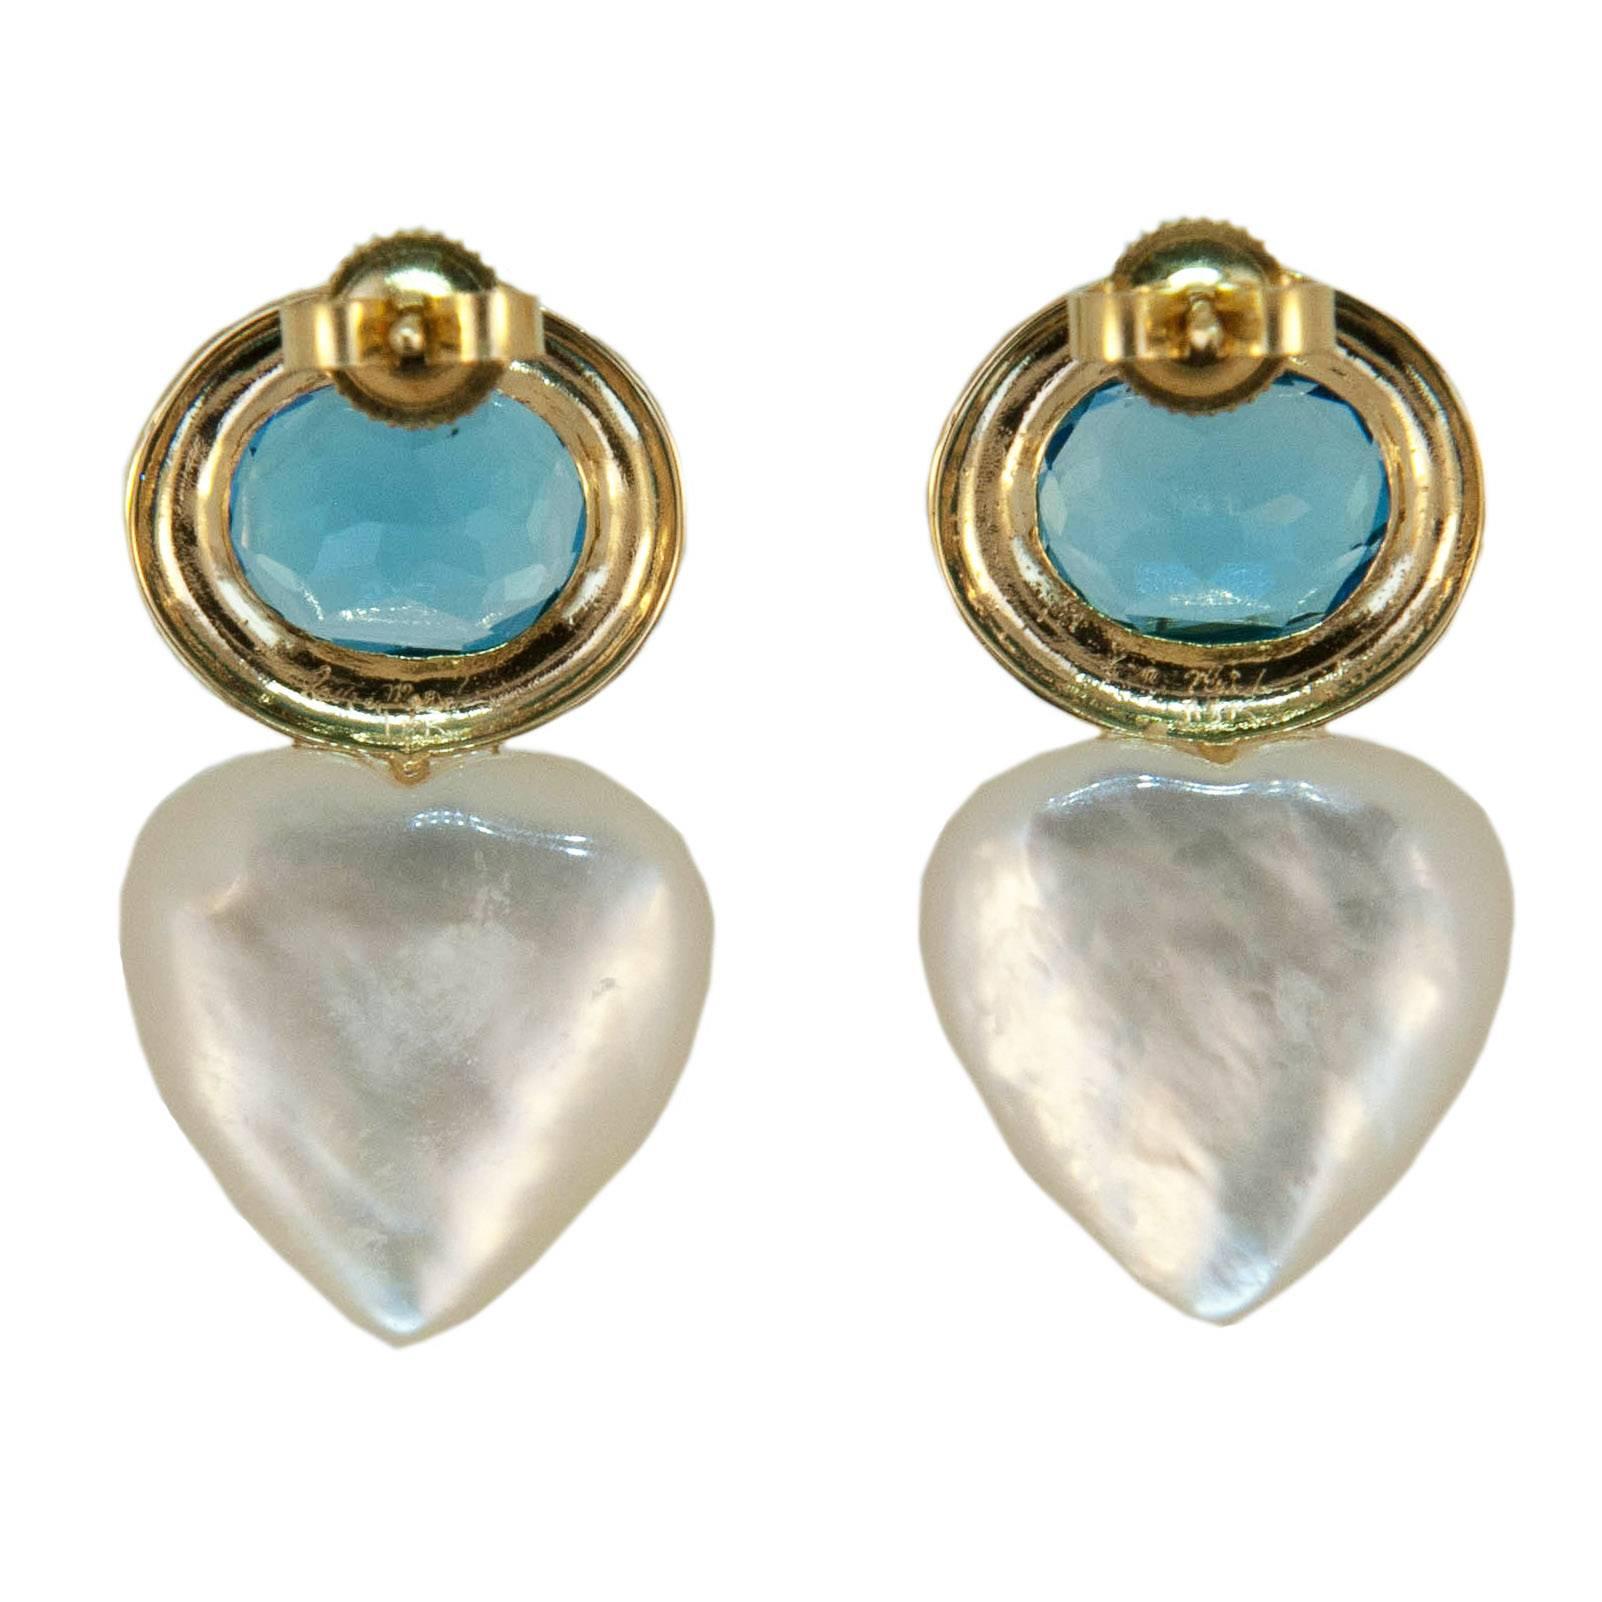 18 karat yellow gold earrings each bezel set with one oval approximate 10x8 millimeter Blue Topaz 6.50 carats total weight. and one 15 millimeter Mother of Pearl heart shape. Friction posts and backs.